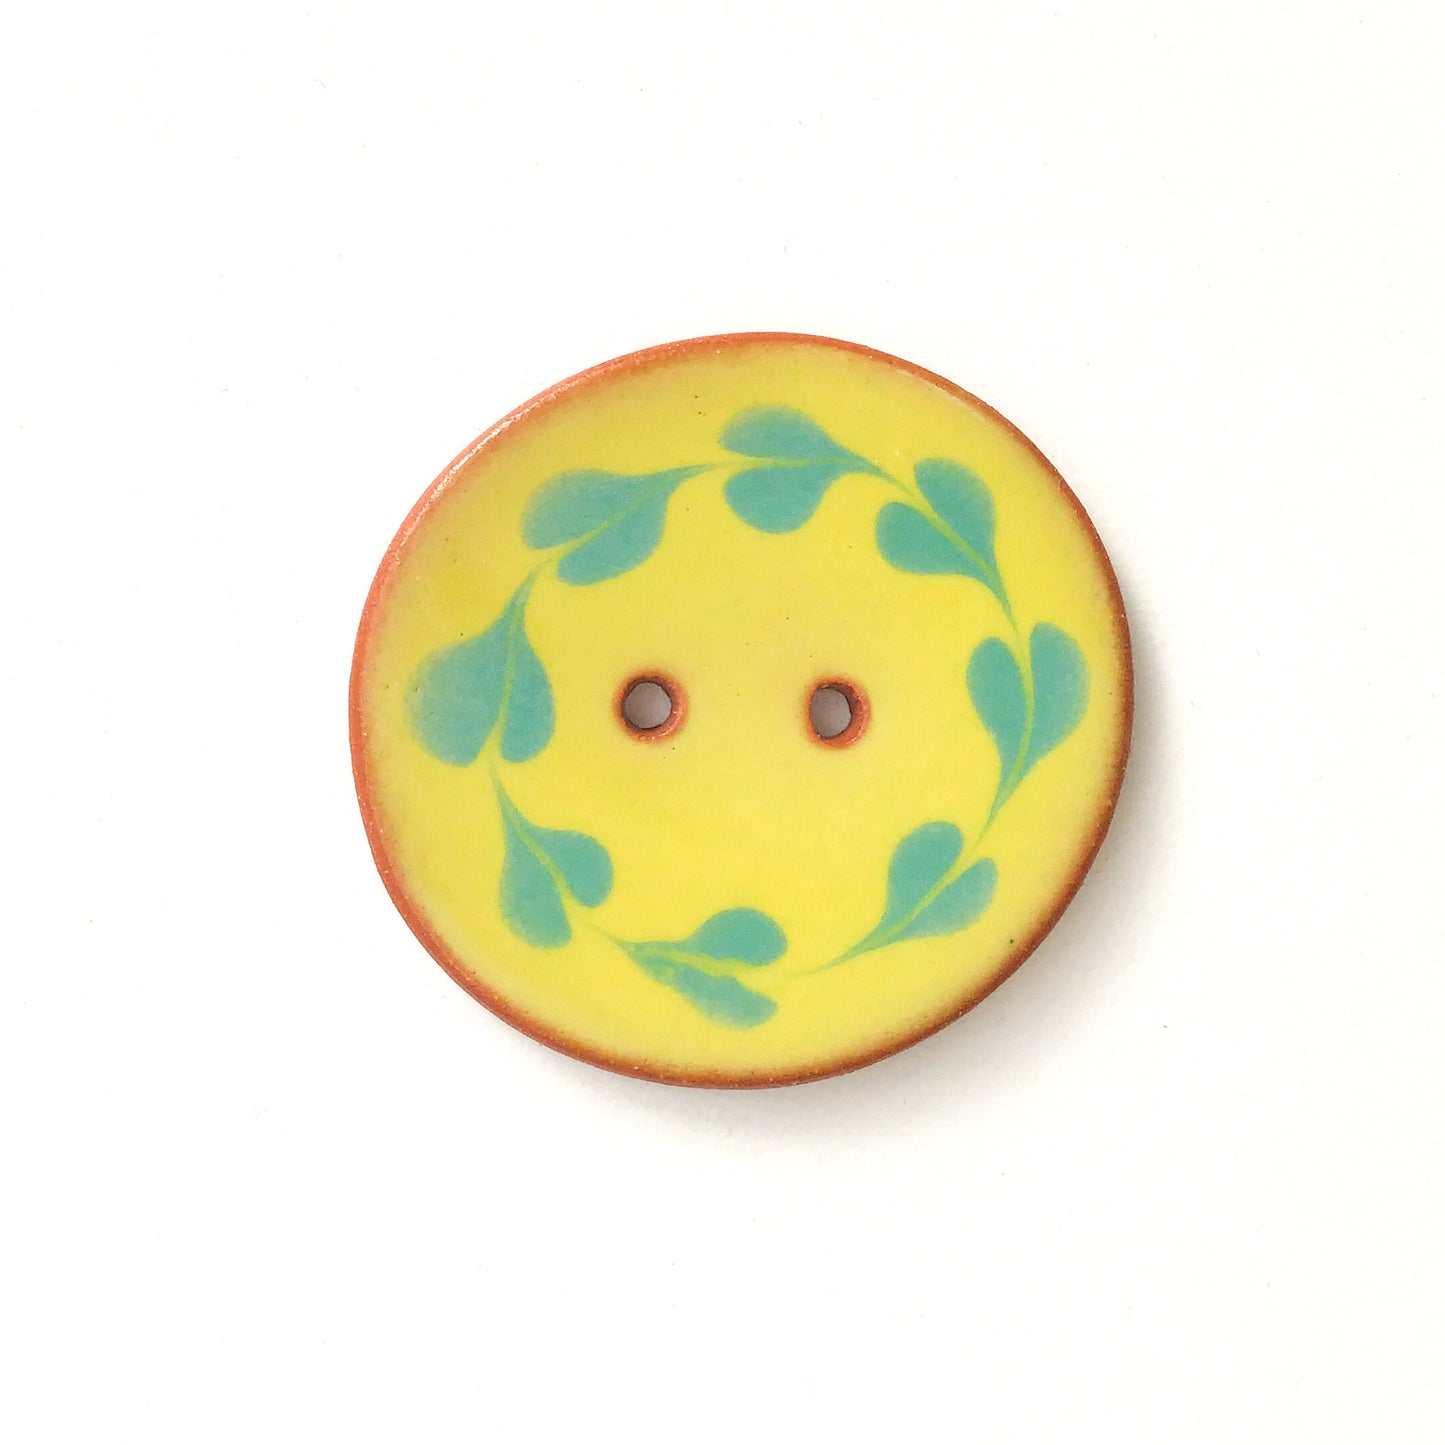 Colorful Wreath Clay Buttons - Decorative Ceramic Buttons - 1 3/8" (ws-53)